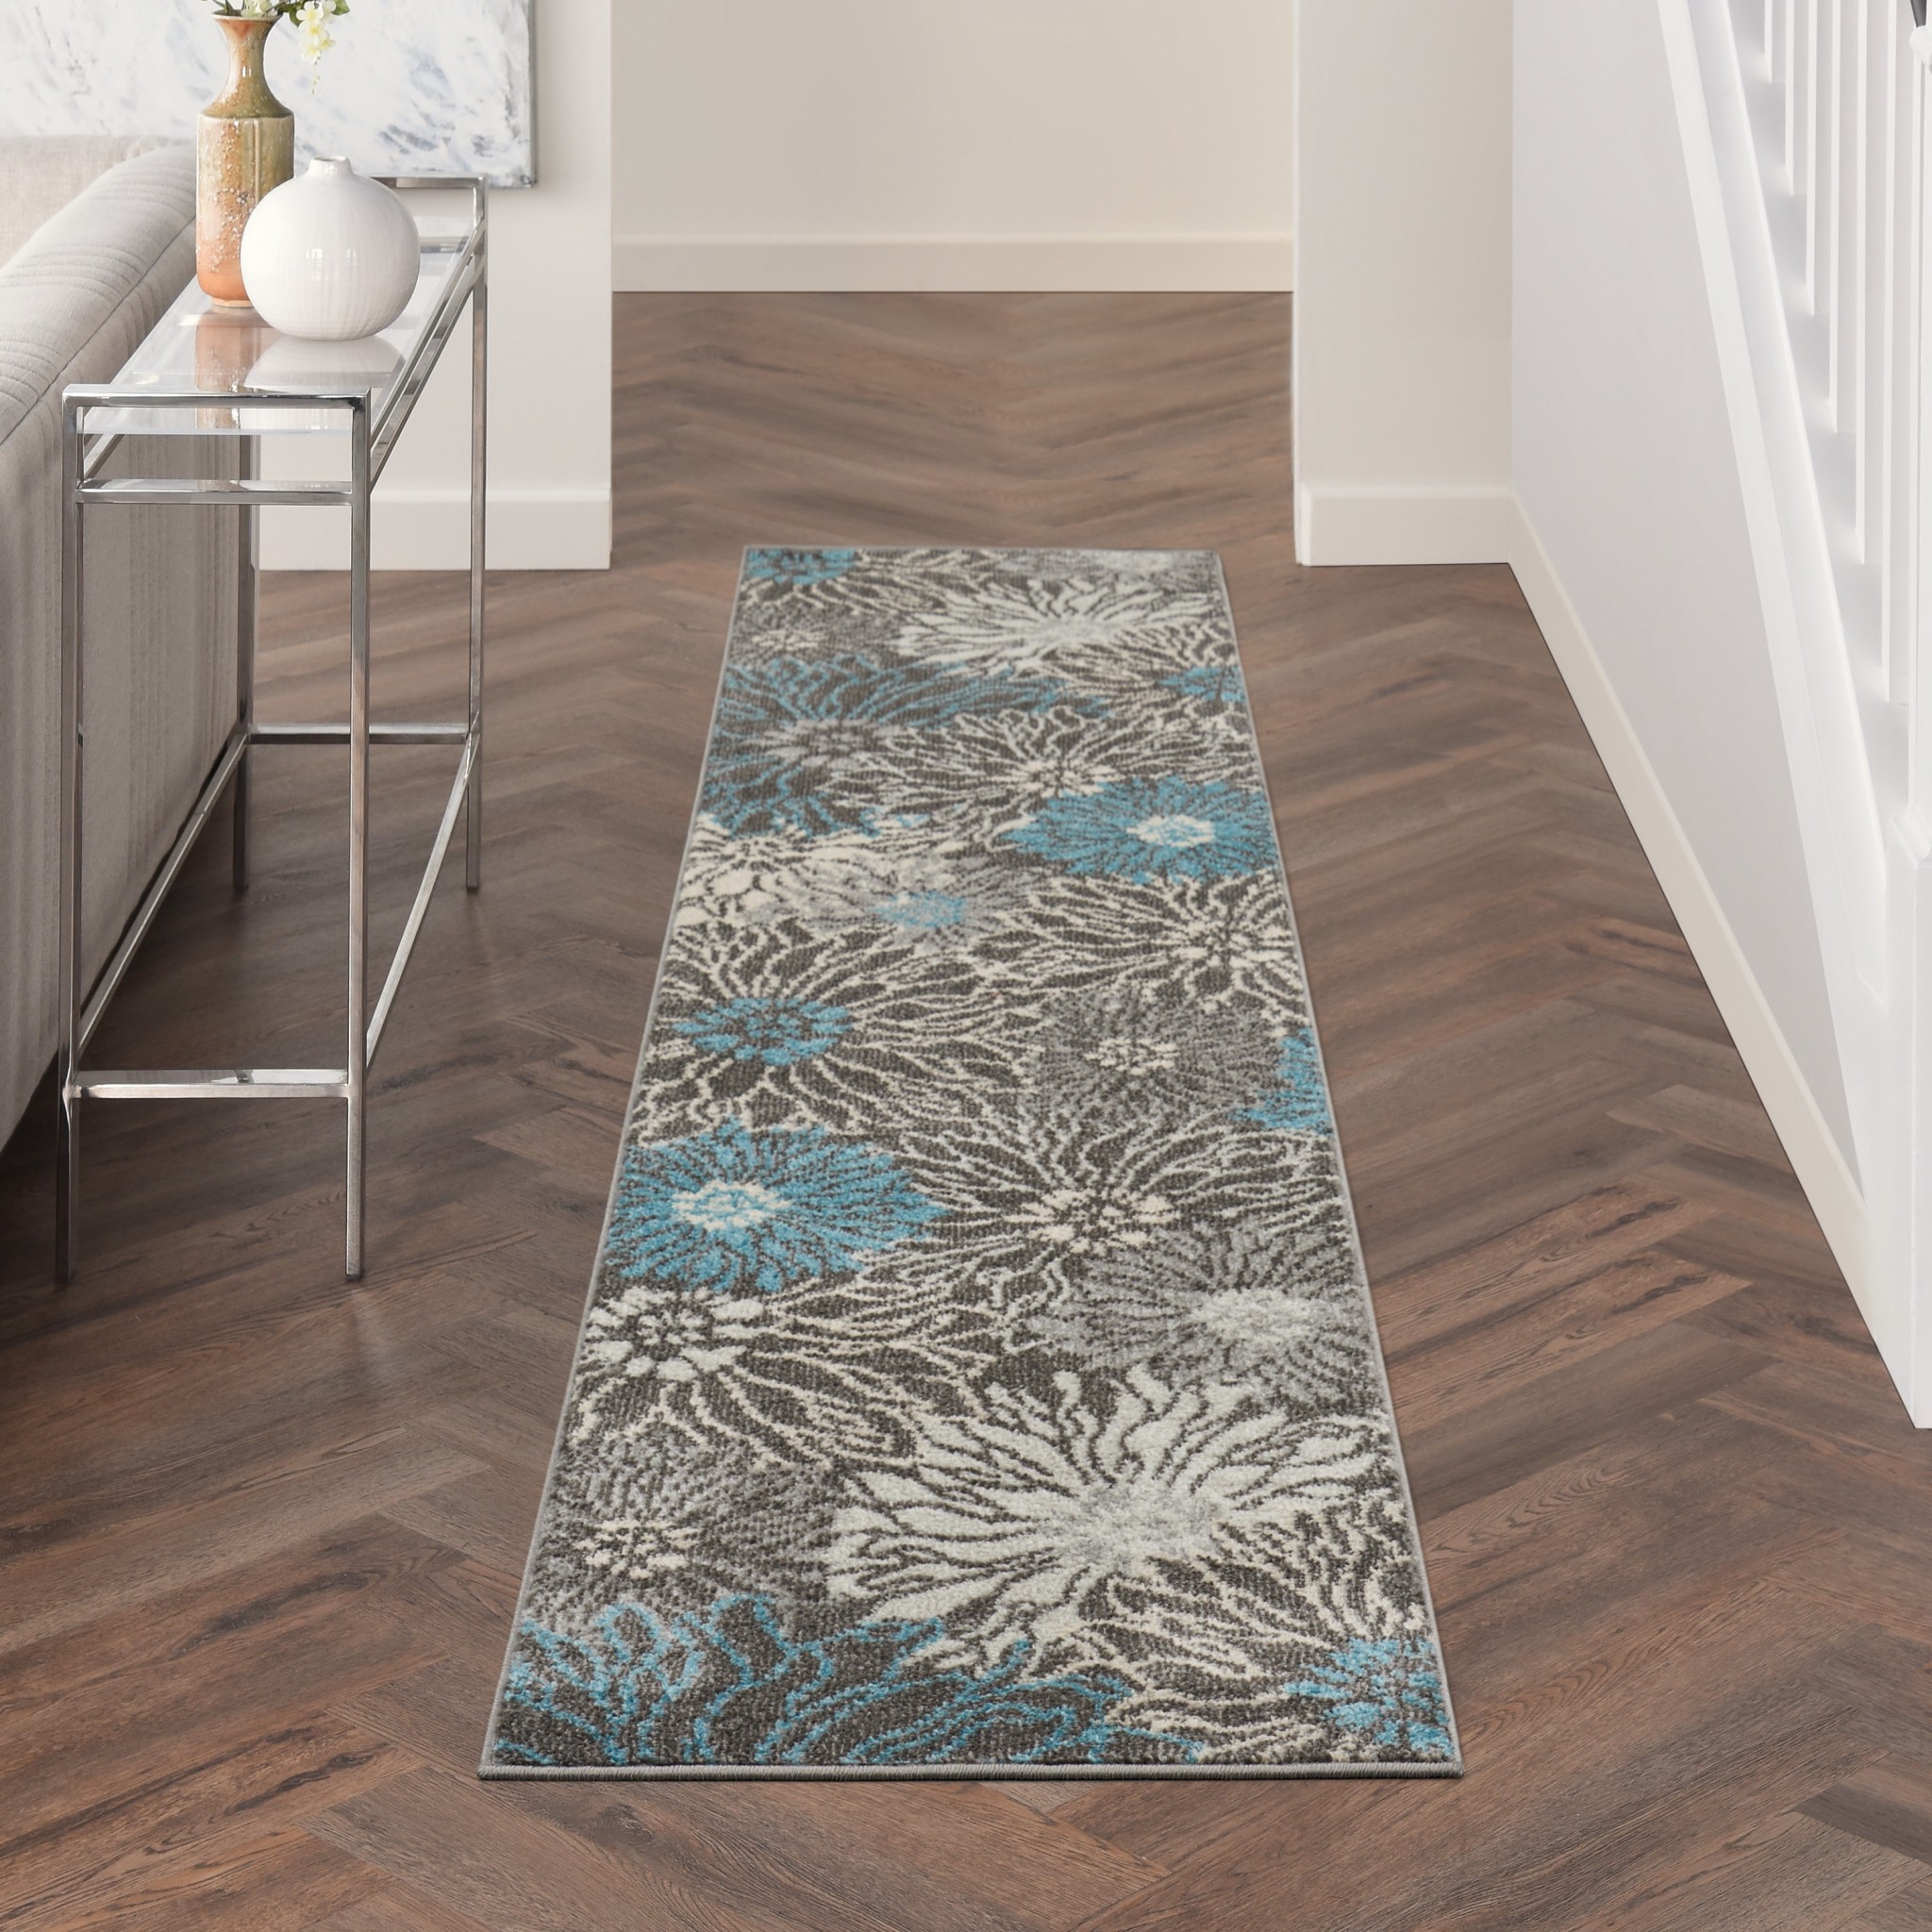 2 x 10 Charcoal and Blue Big Flower Runner Rug